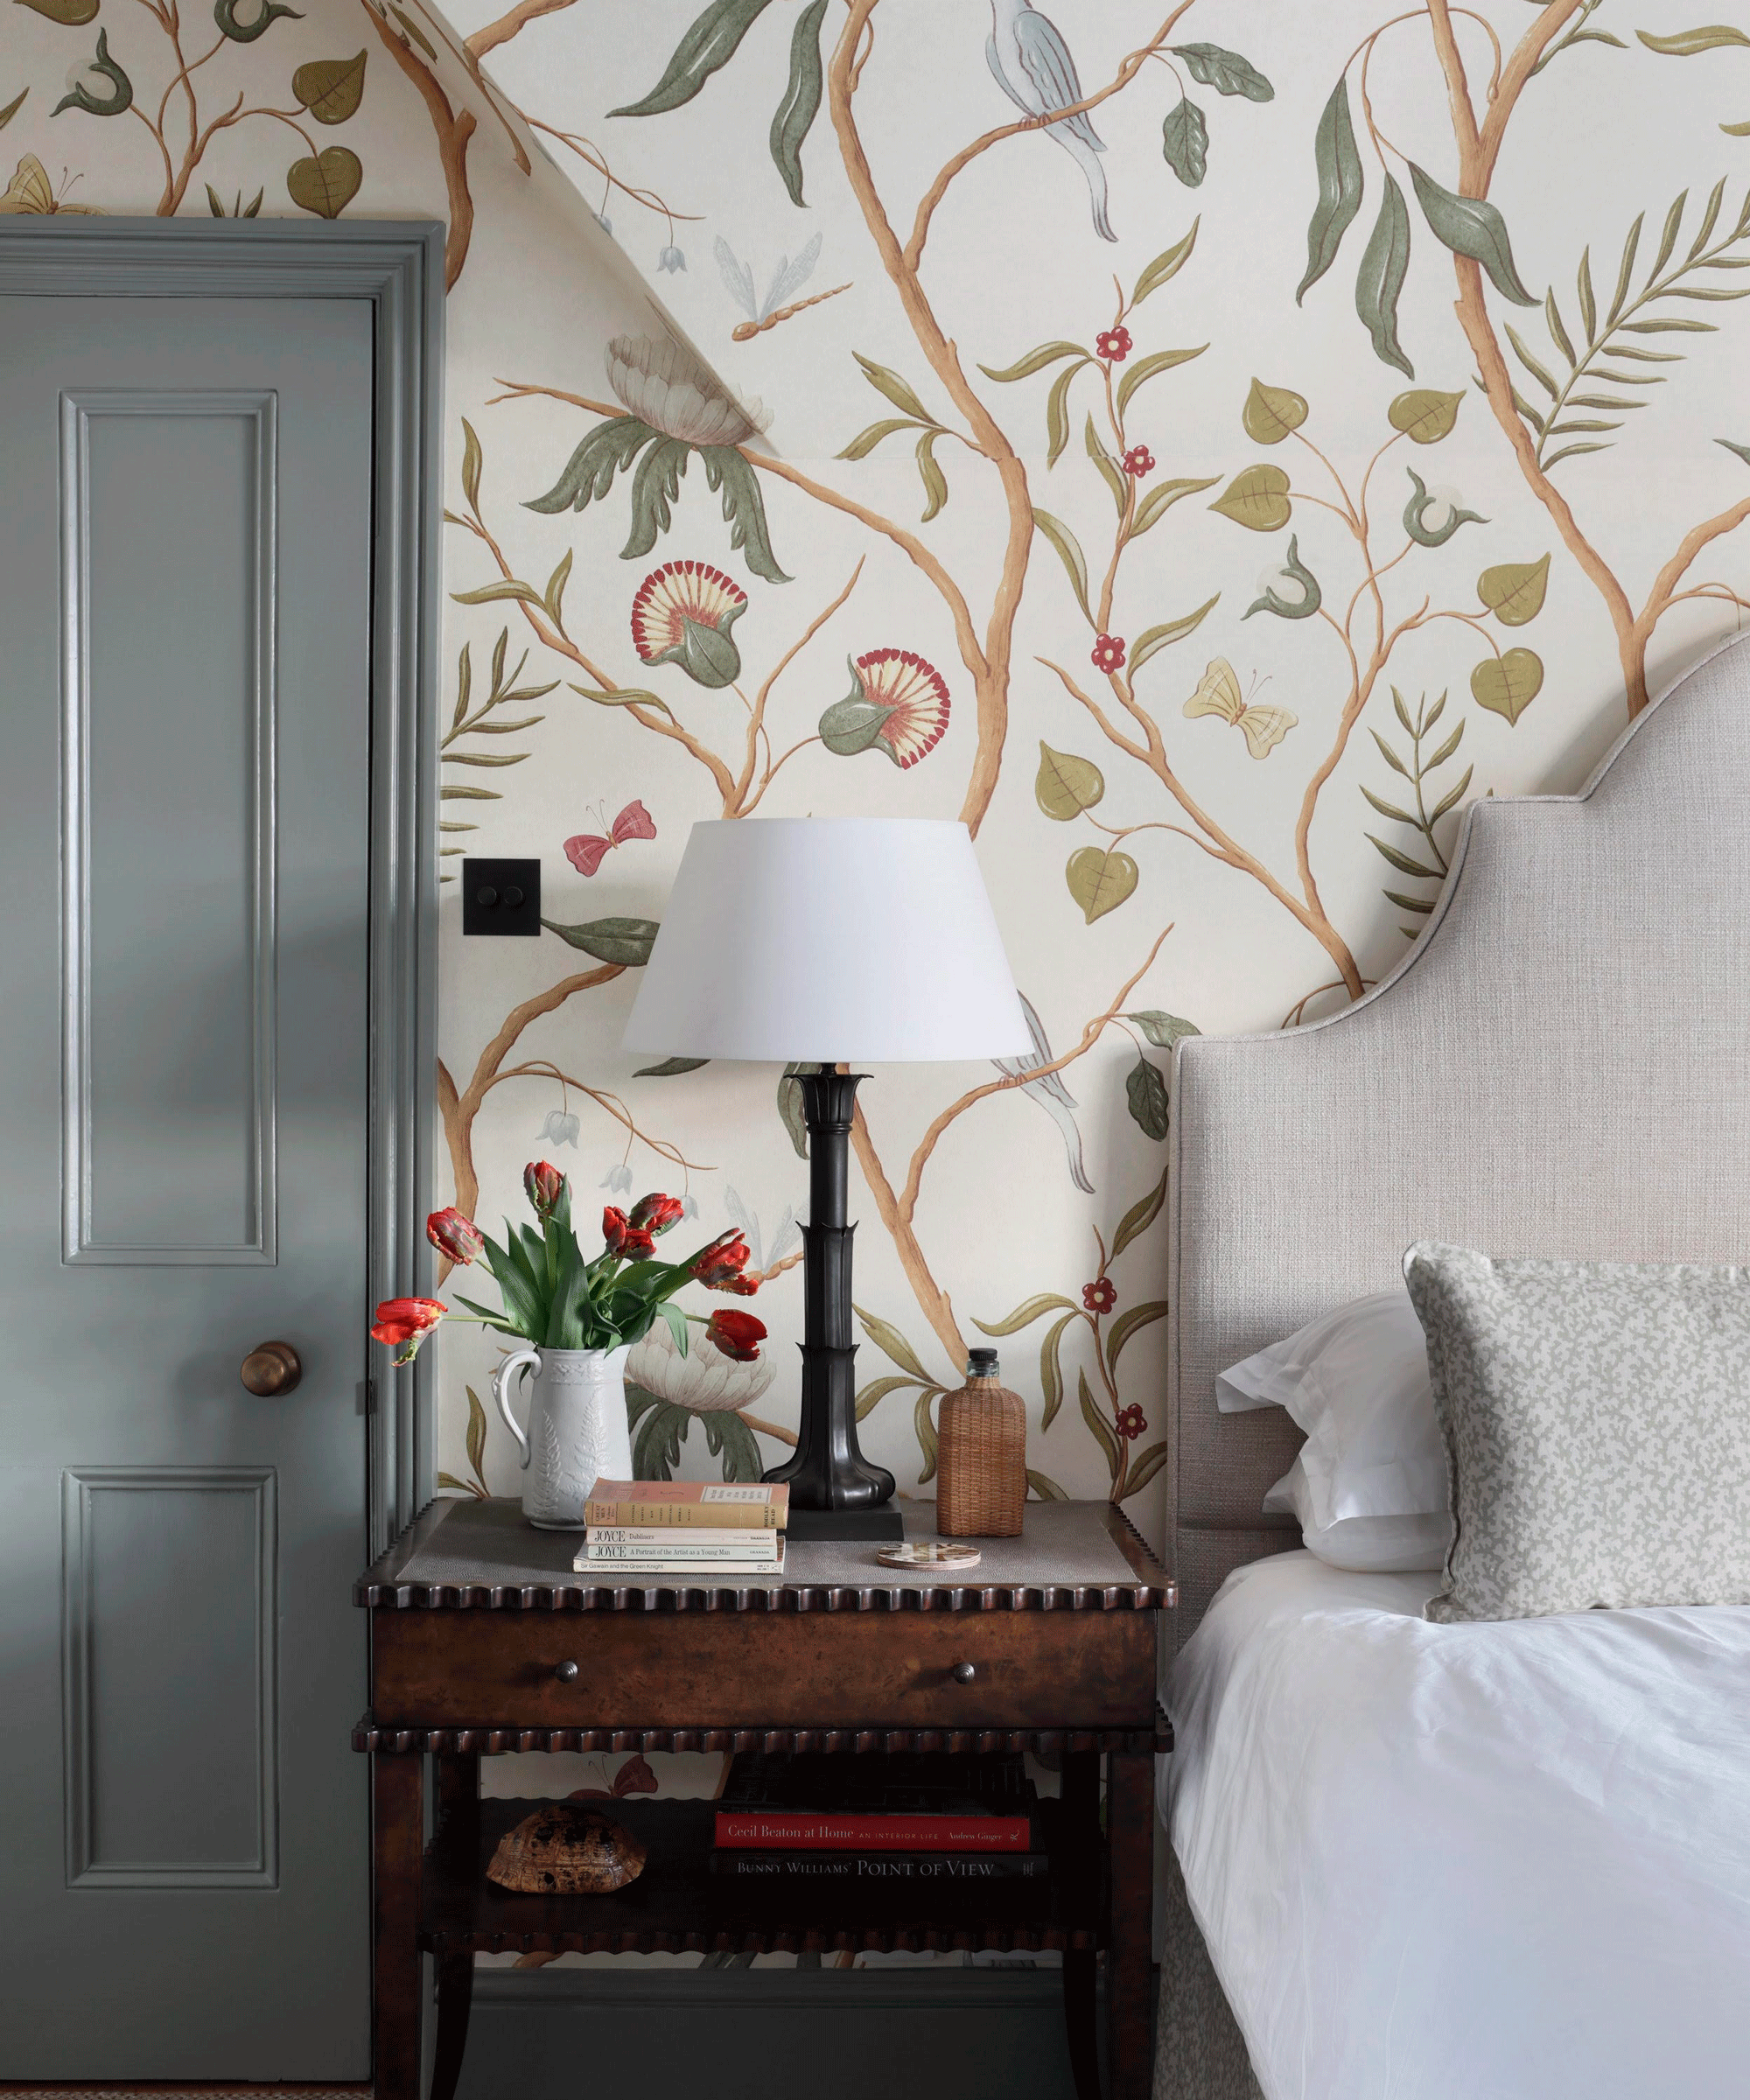 Small bedroom with a mural like wallpaper with tree branches